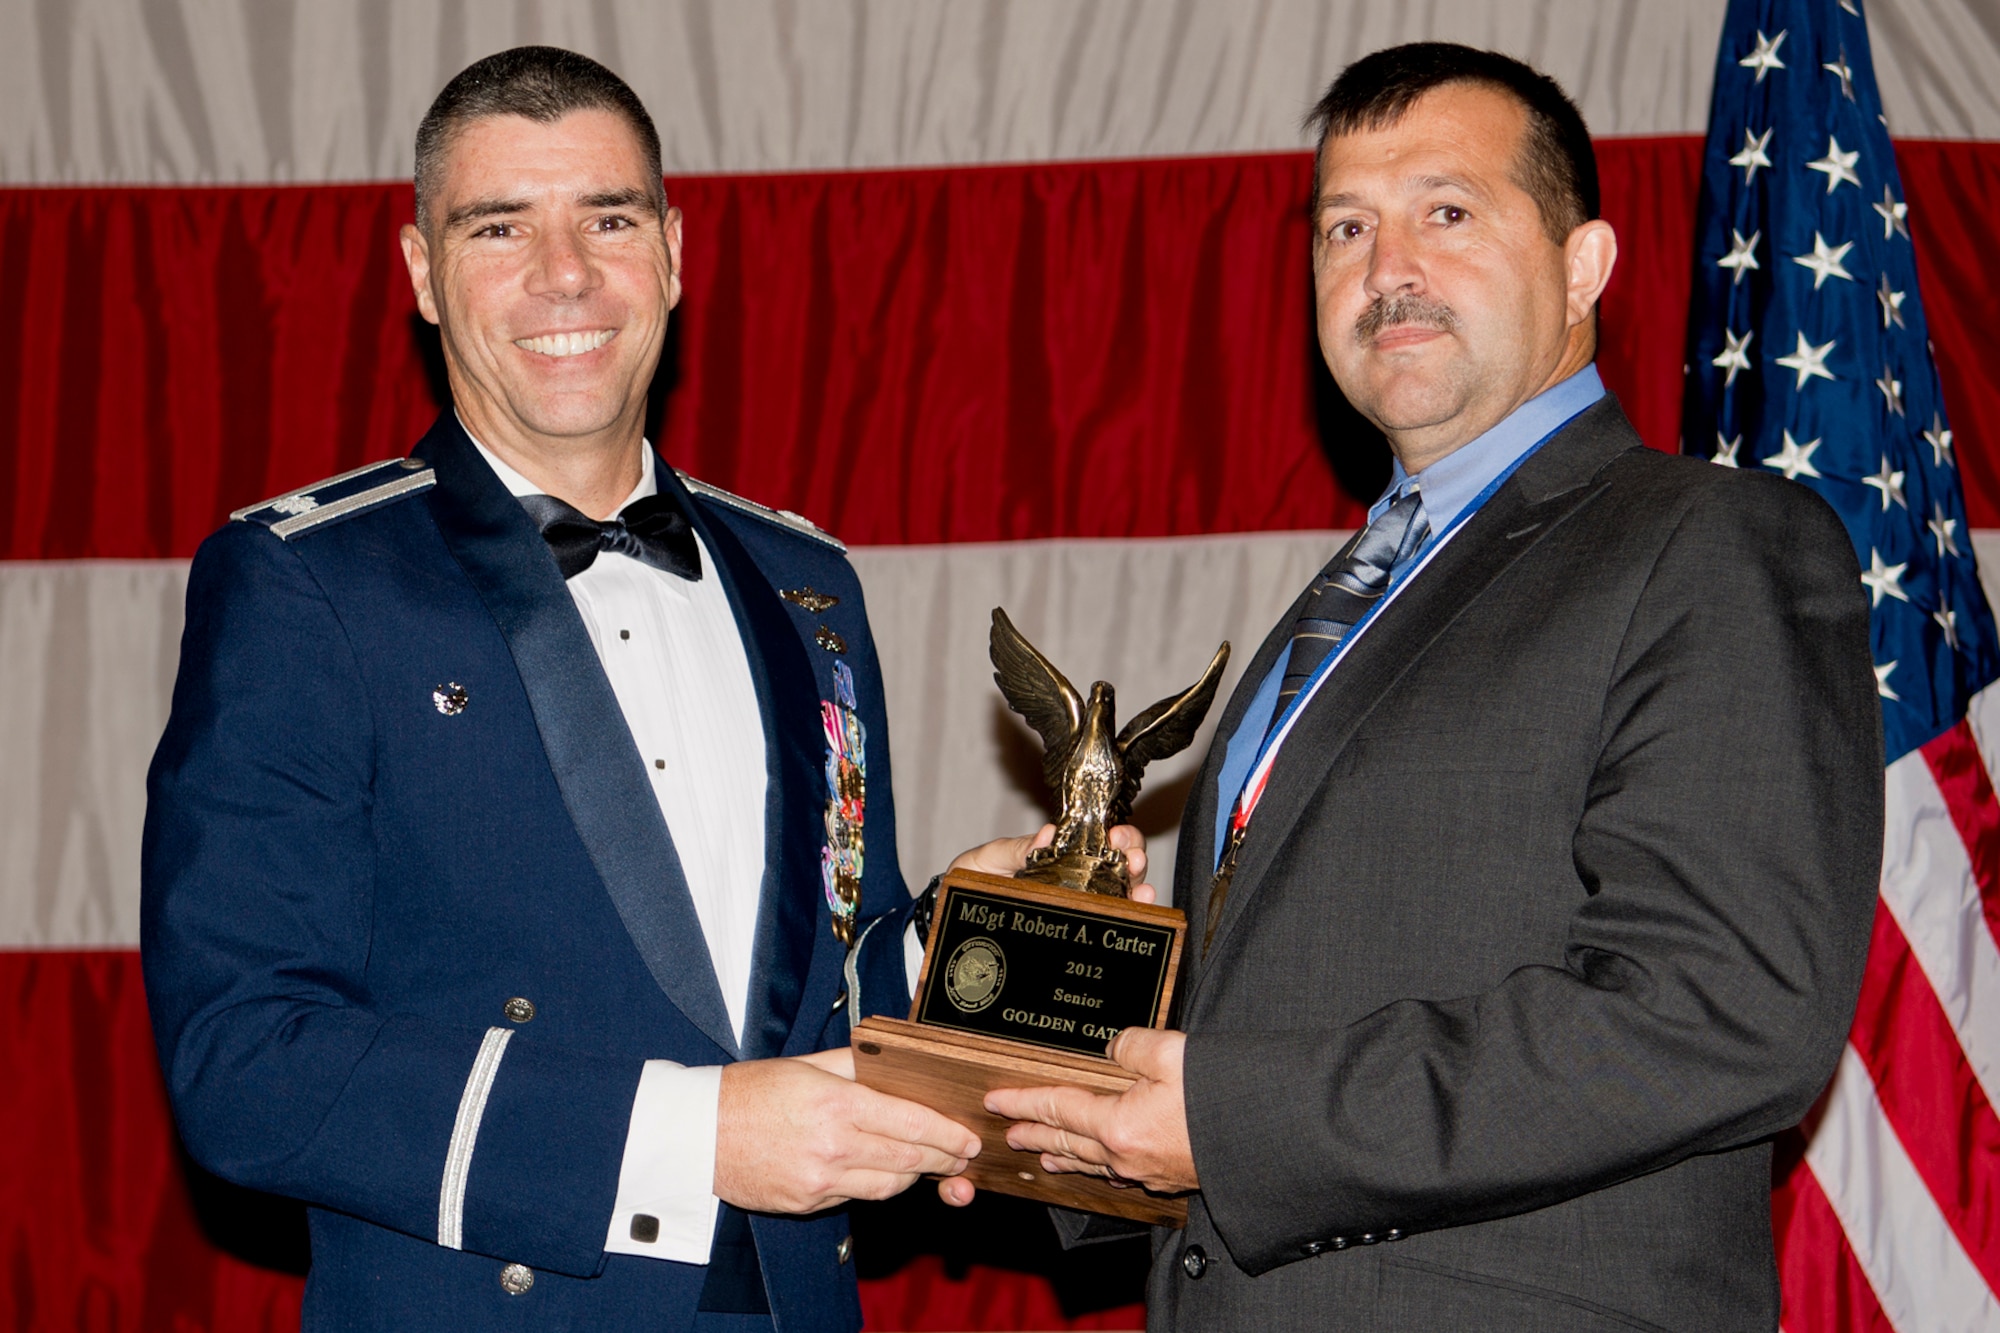 U.S. Air Force Lt. Col. Kenneth Rose, 307th Maintenance Group commander, presents the Senior Golden Gator Award to Master Sgt. Robert Carter, 307th Aircraft Maintenance Squadron, Dec. 1, 2012, Barksdale Air Force Base, La. This award is given to the senior noncommissioned officer who made the greatest contribution with their career field to the 307th Bomb Wing maintenance community. (U.S. Air Force photo by Master Sgt. Greg Steele/Released)